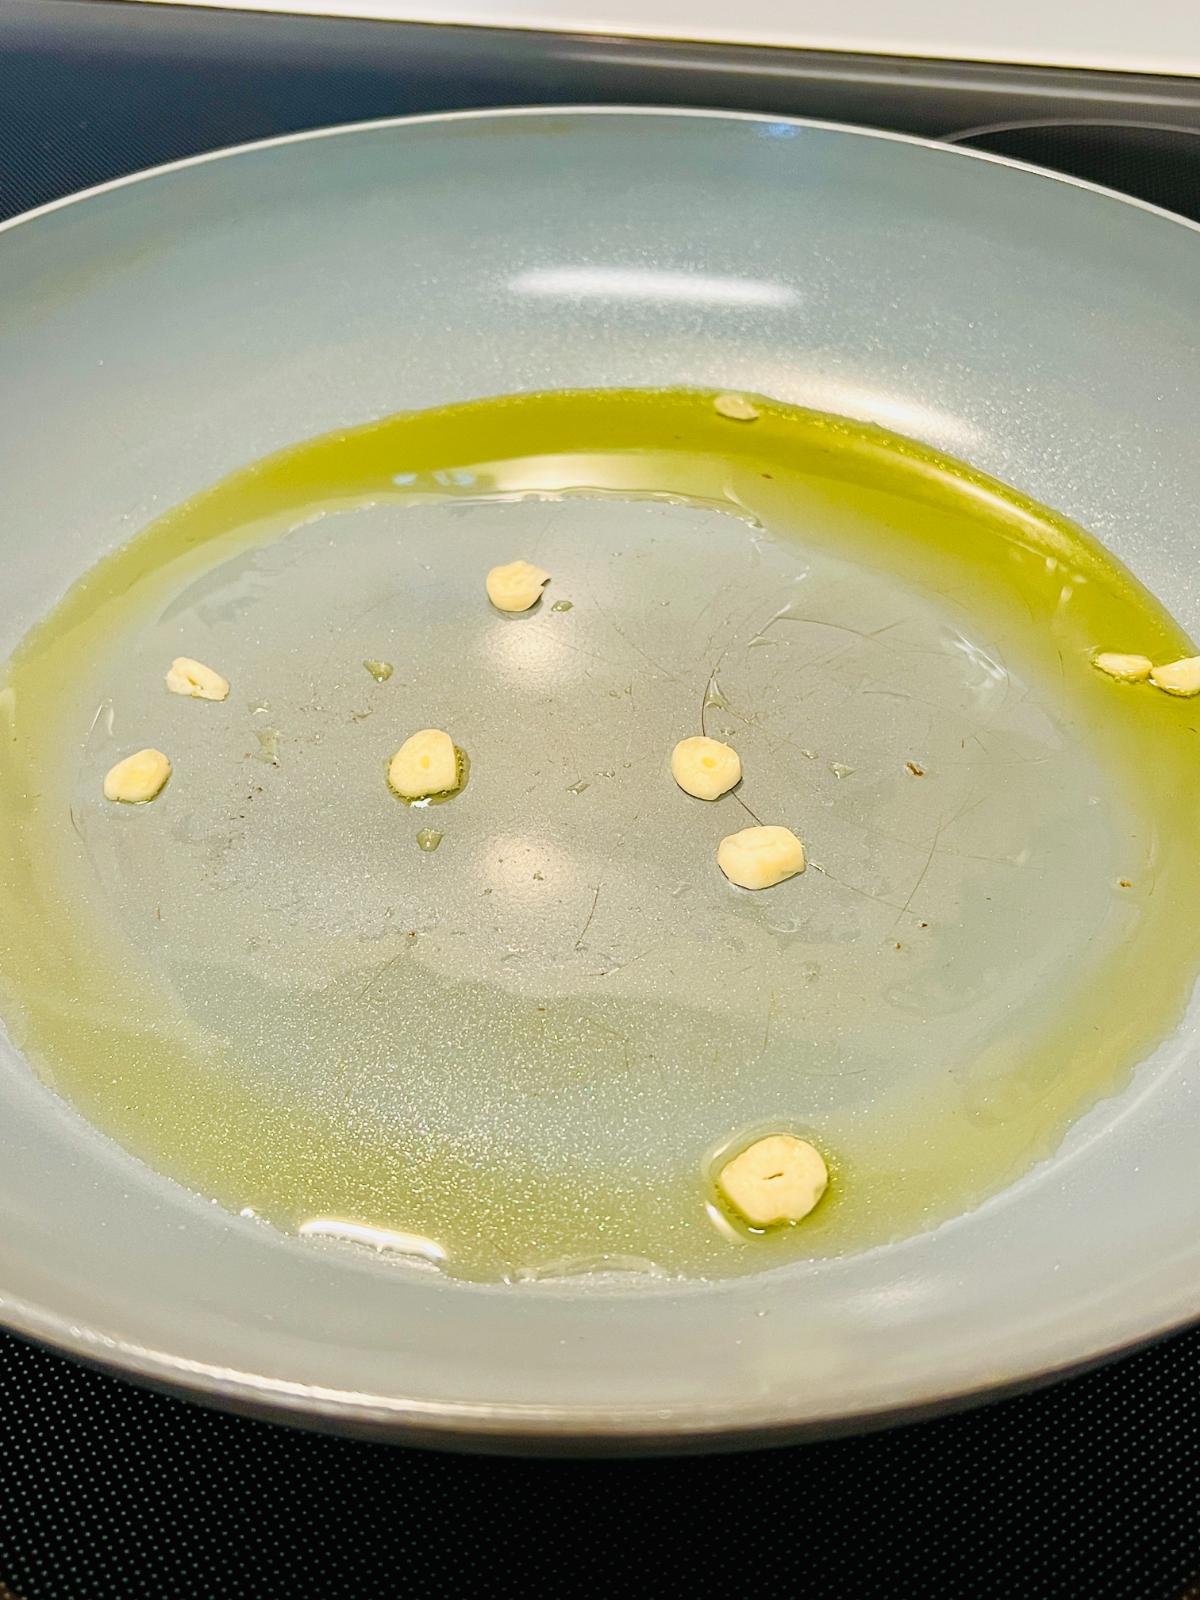 A close-up of a pan with olive oil and garlic.